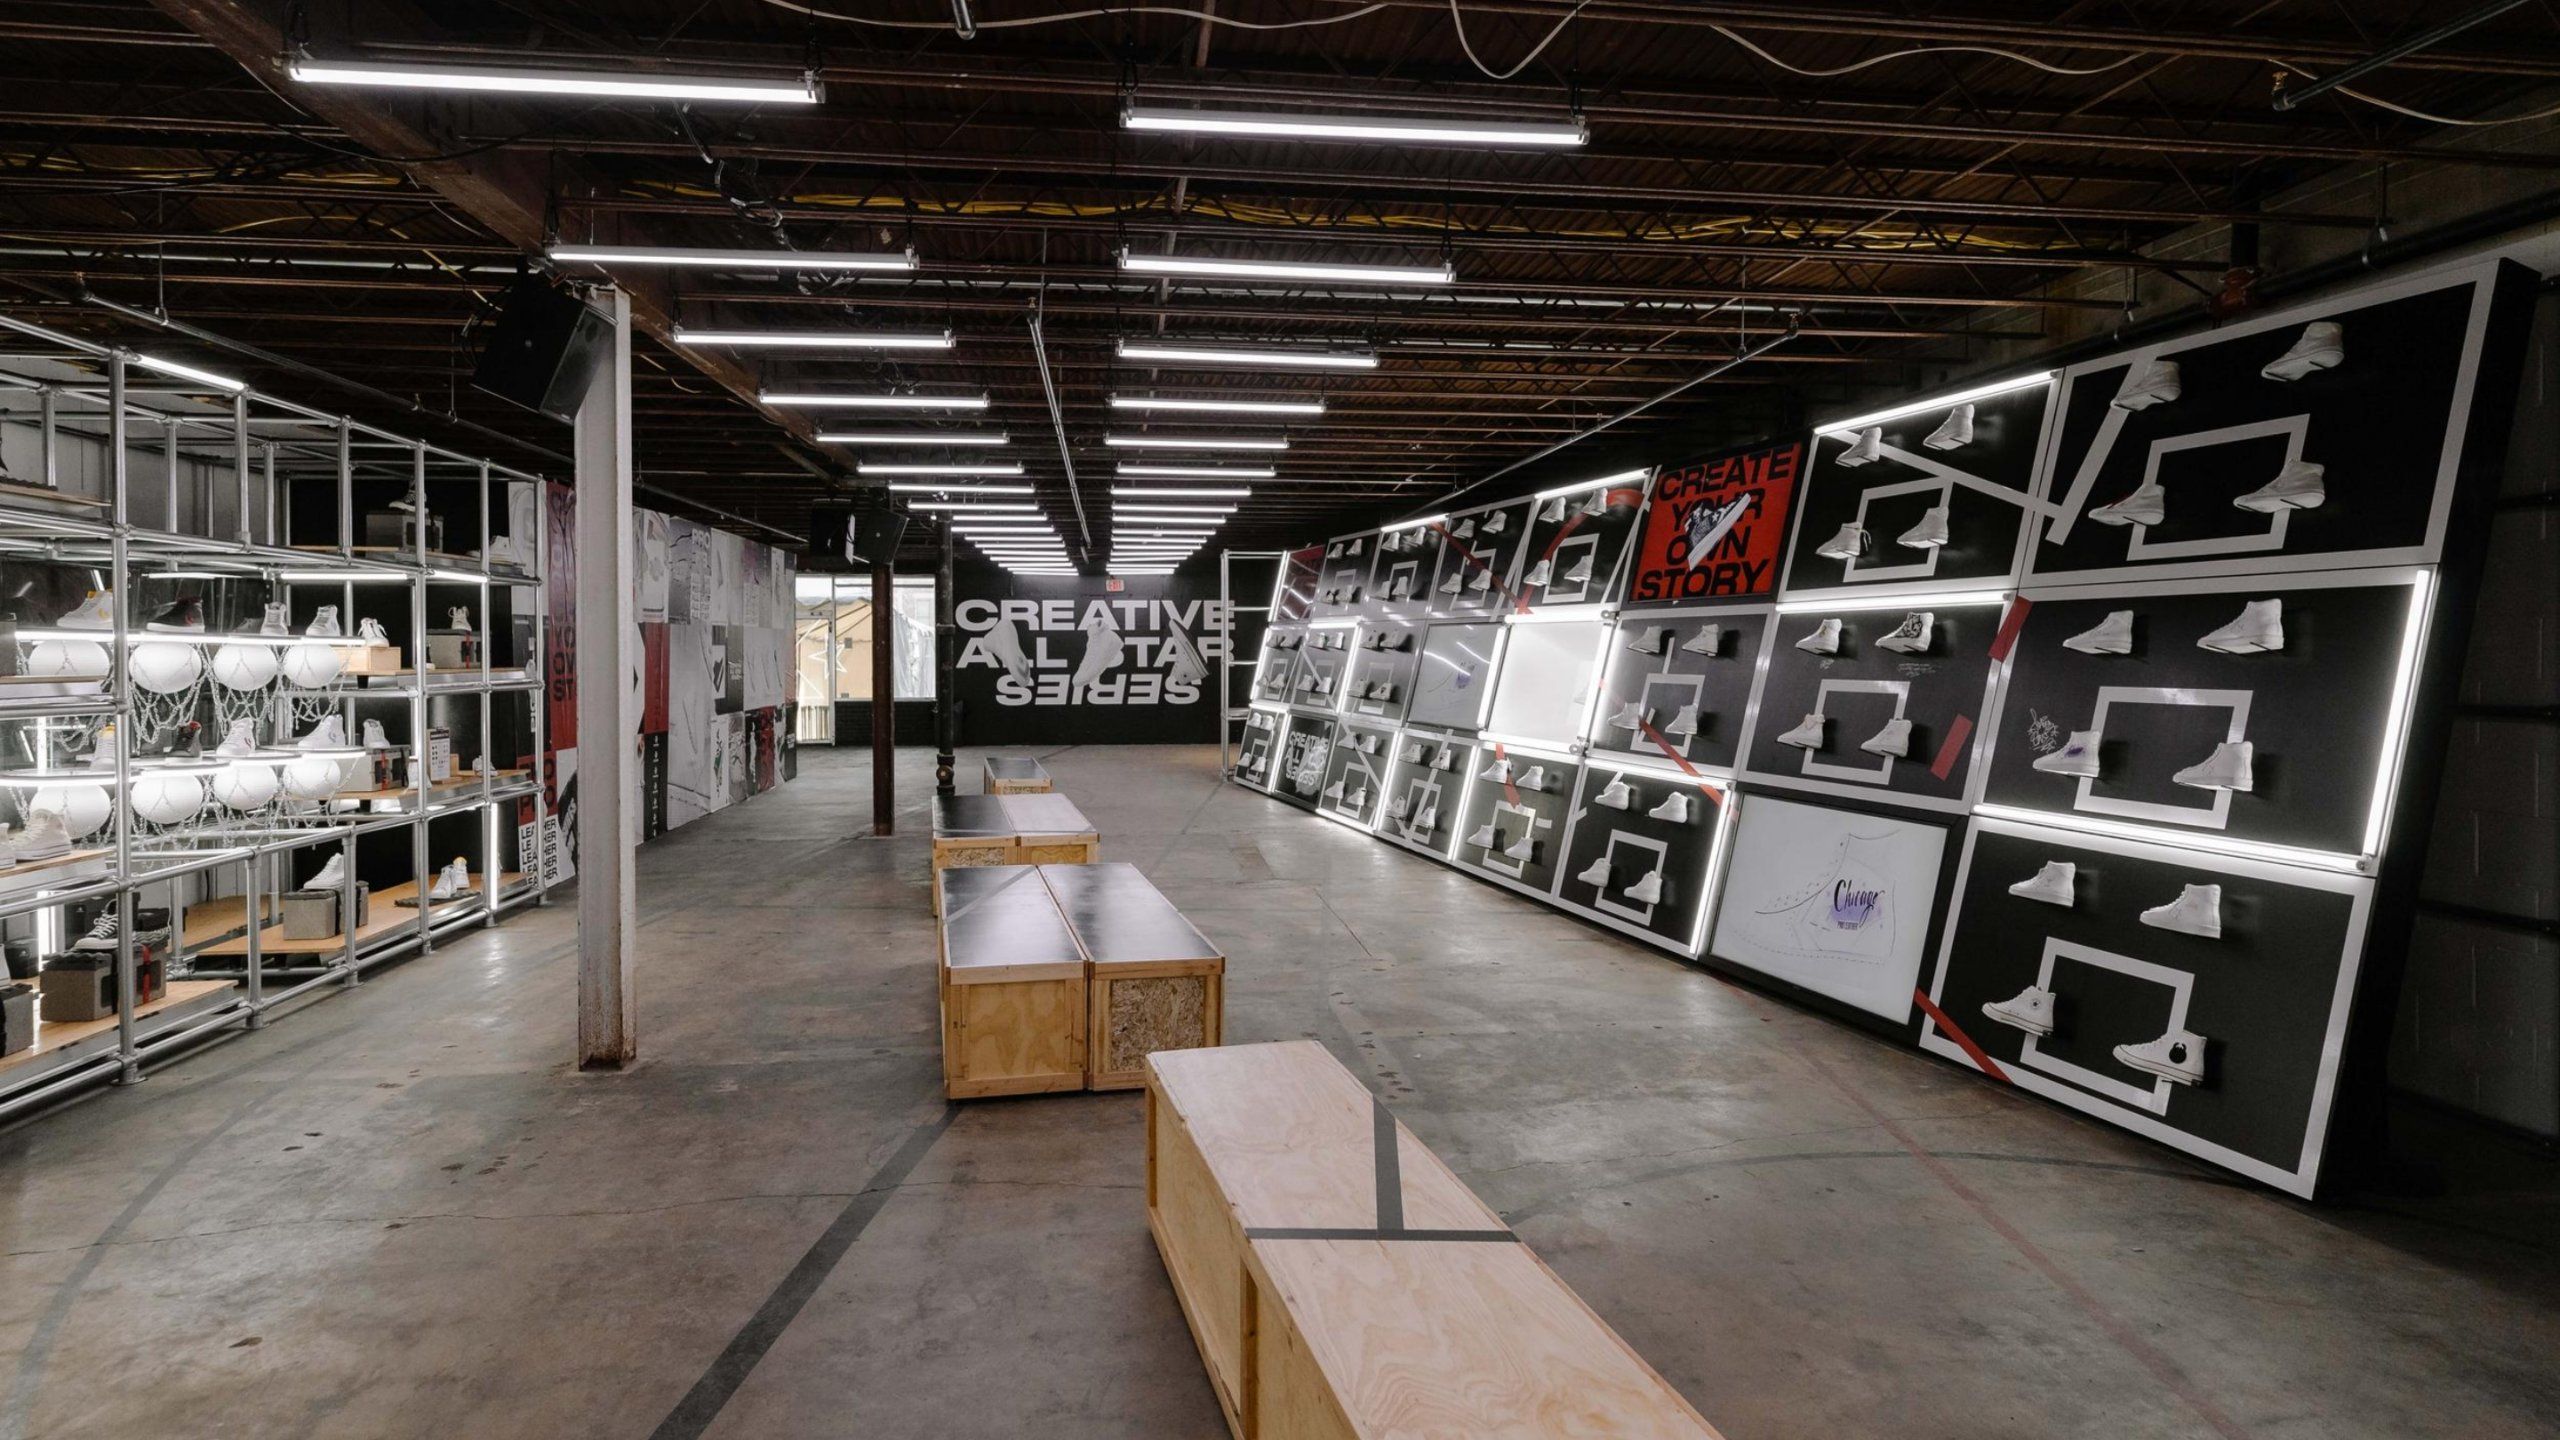 Creative All Star series warehouse room with shoe displays and basketball sculptures